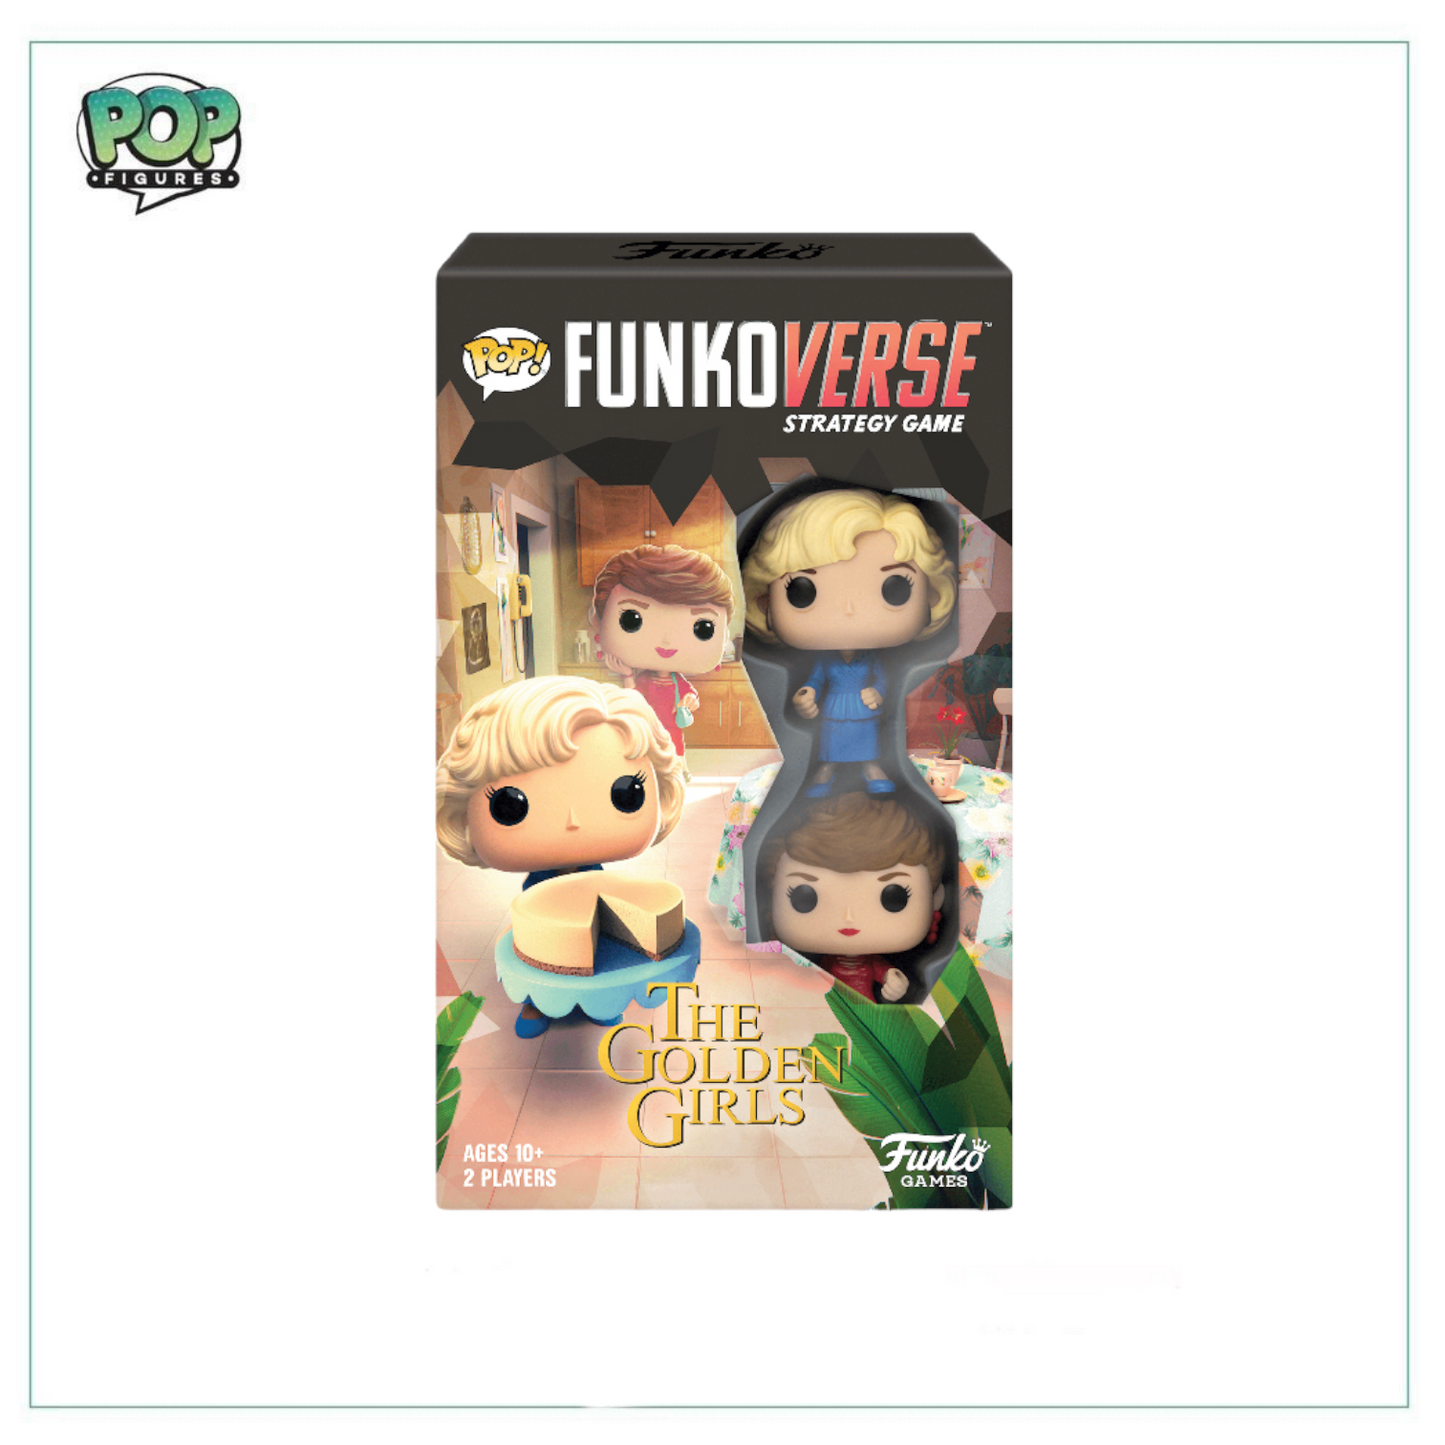 The Golden Girls Funko Verse Strategy Game! The Golden Girls - Angry Cat